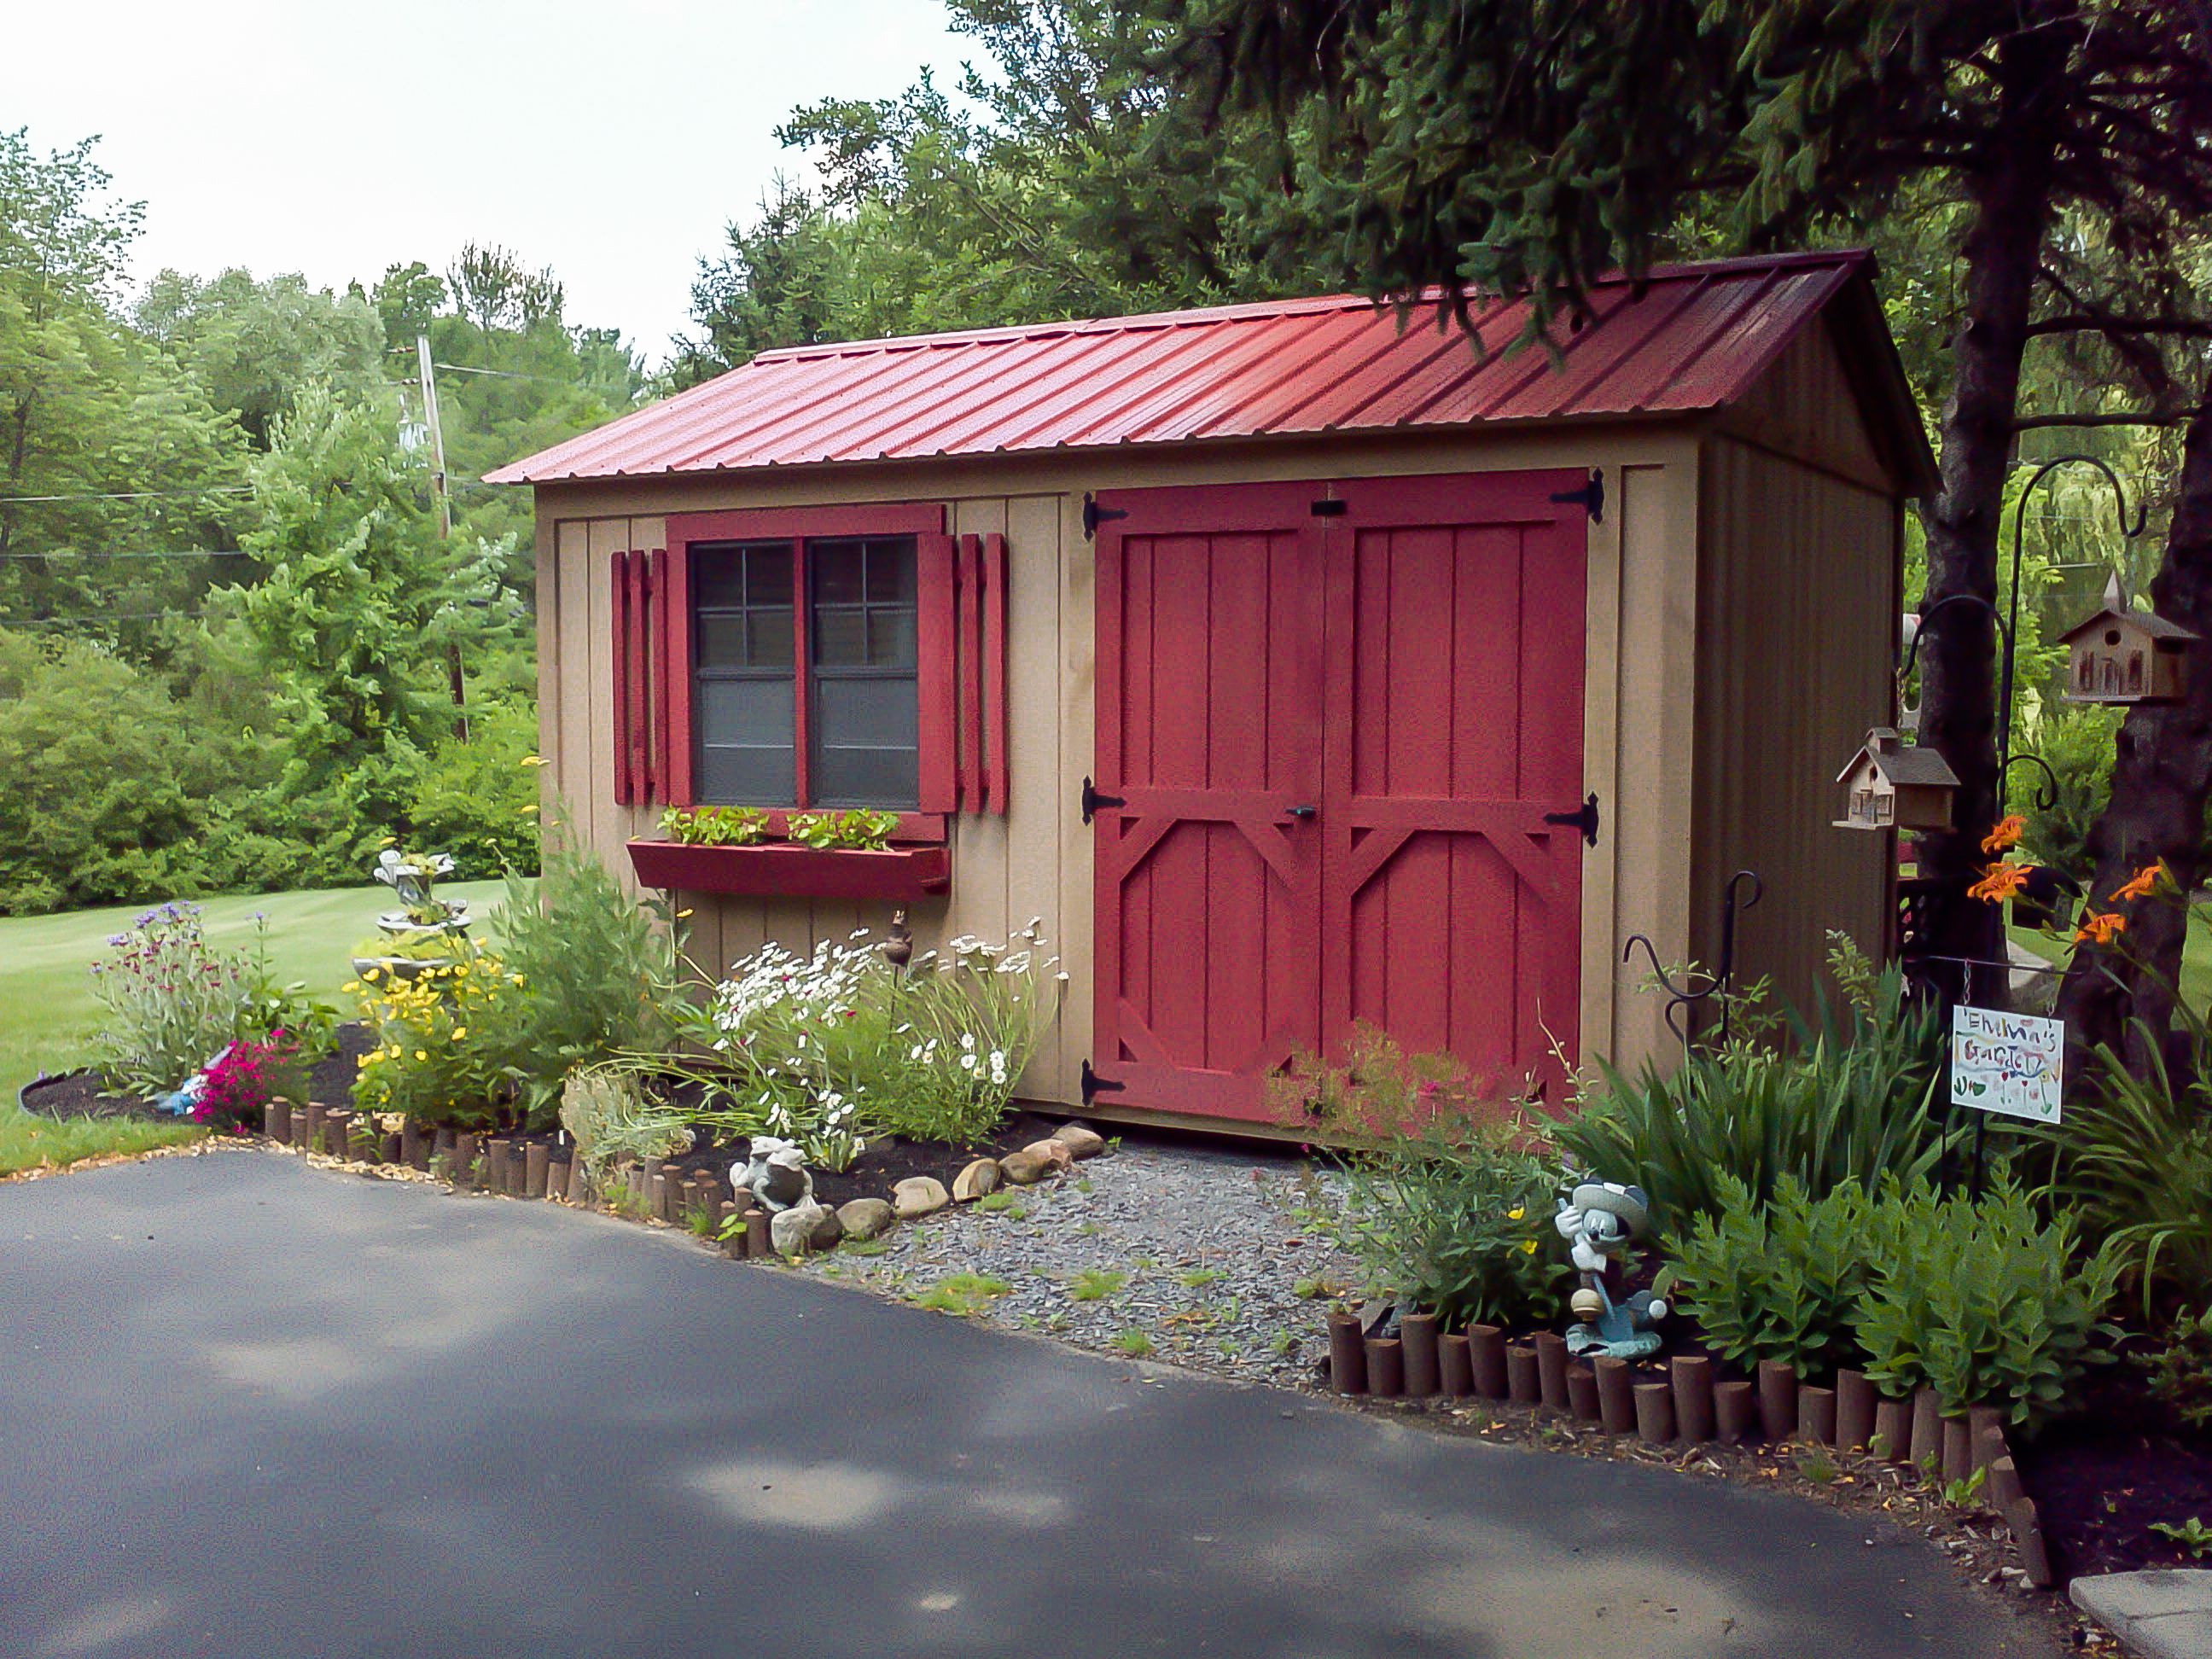 Unique sheds come in all varieties. There are utility sheds, garden 